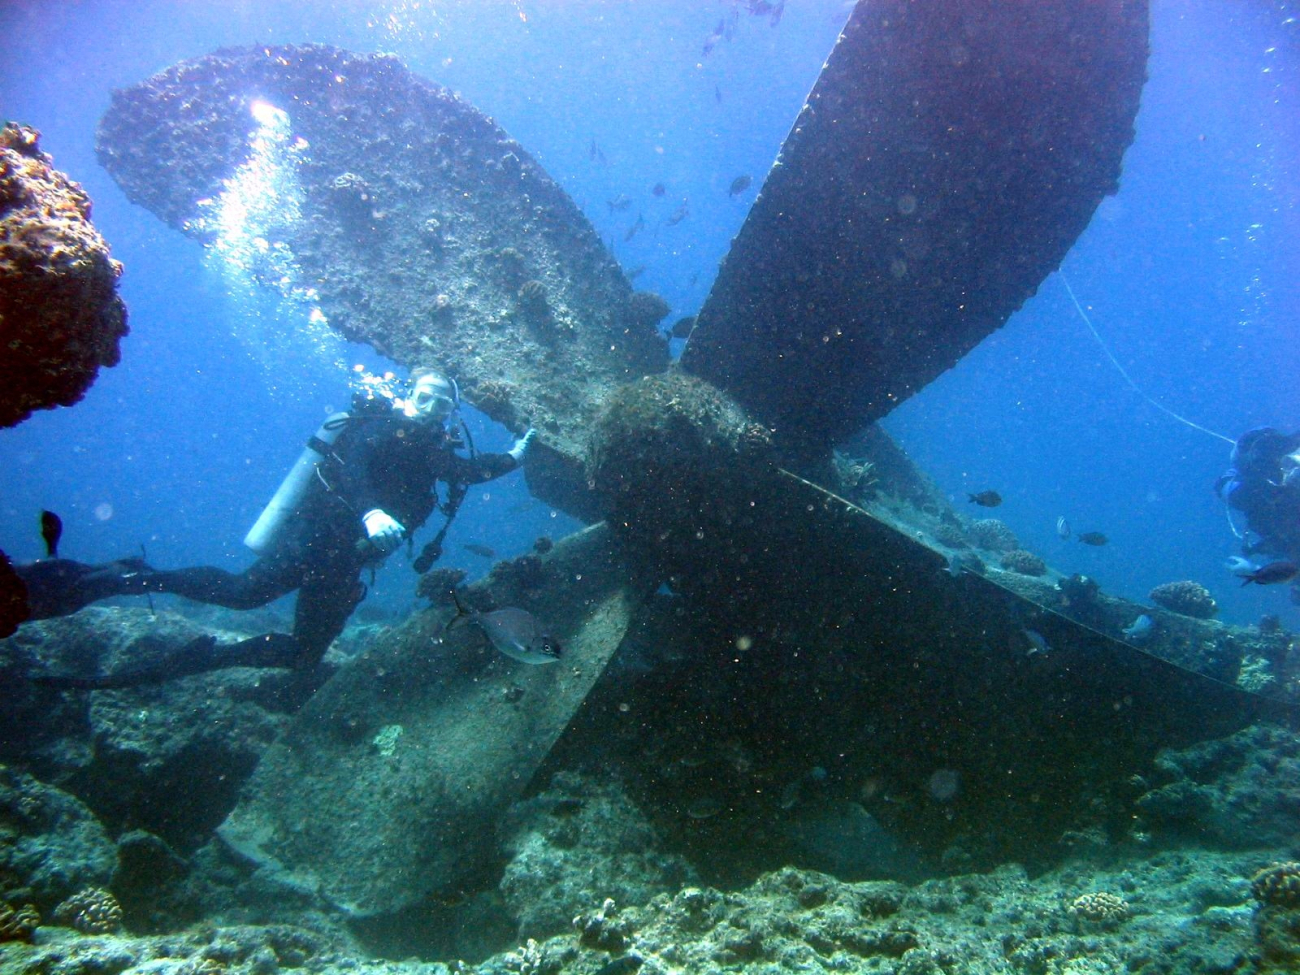 Modern ship wreck at Pearl and Hermes Reef